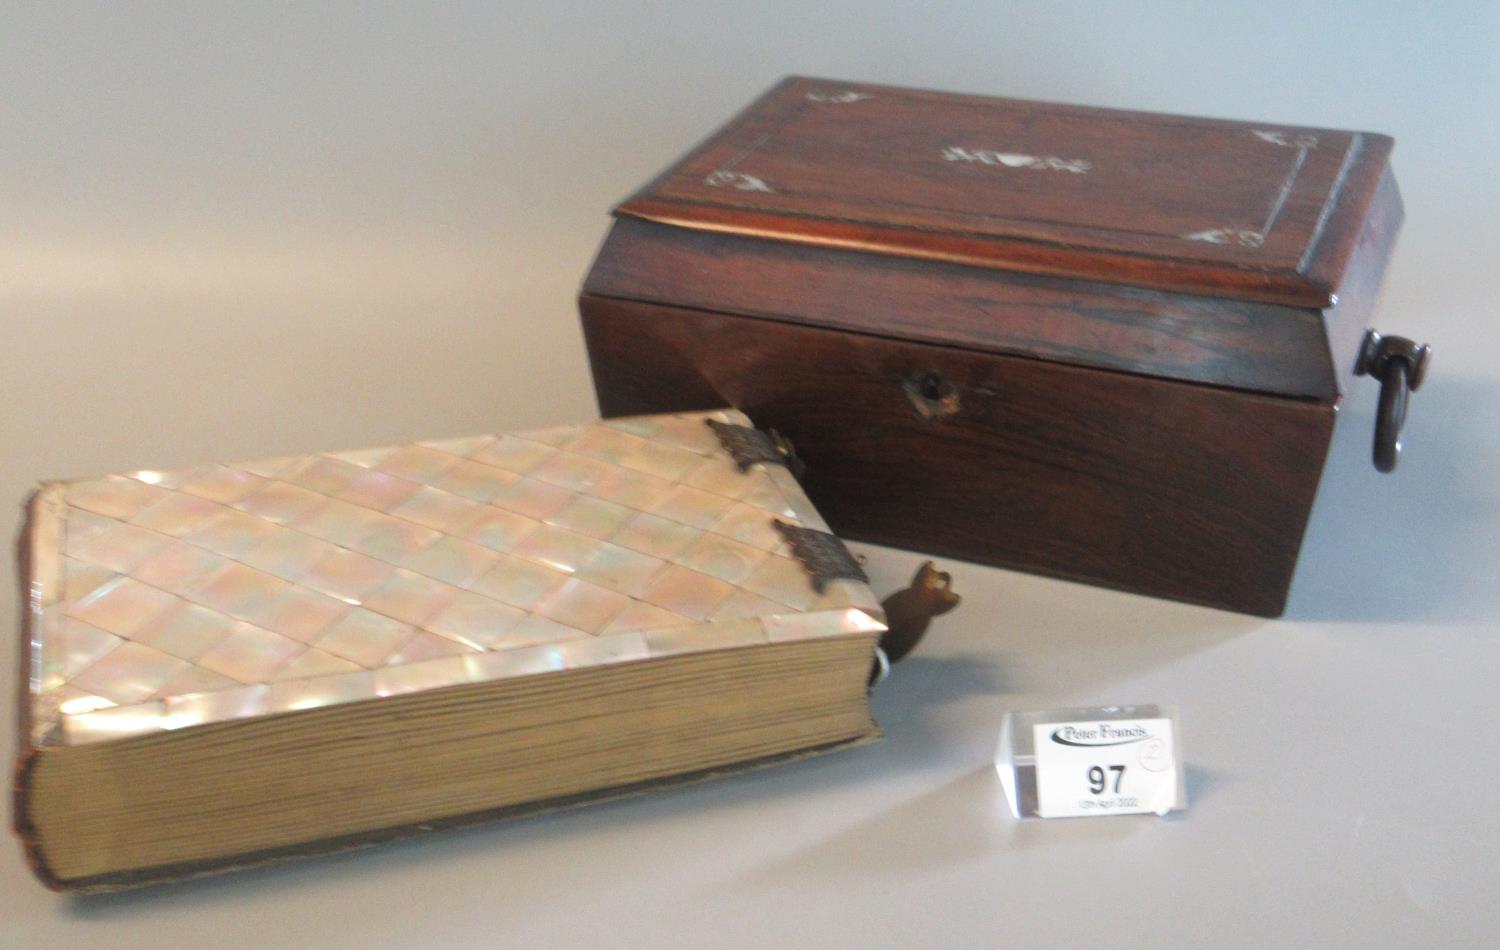 19th century mother of pearl inlaid rosewood sarcophagus shaped box with loop wooden handles,